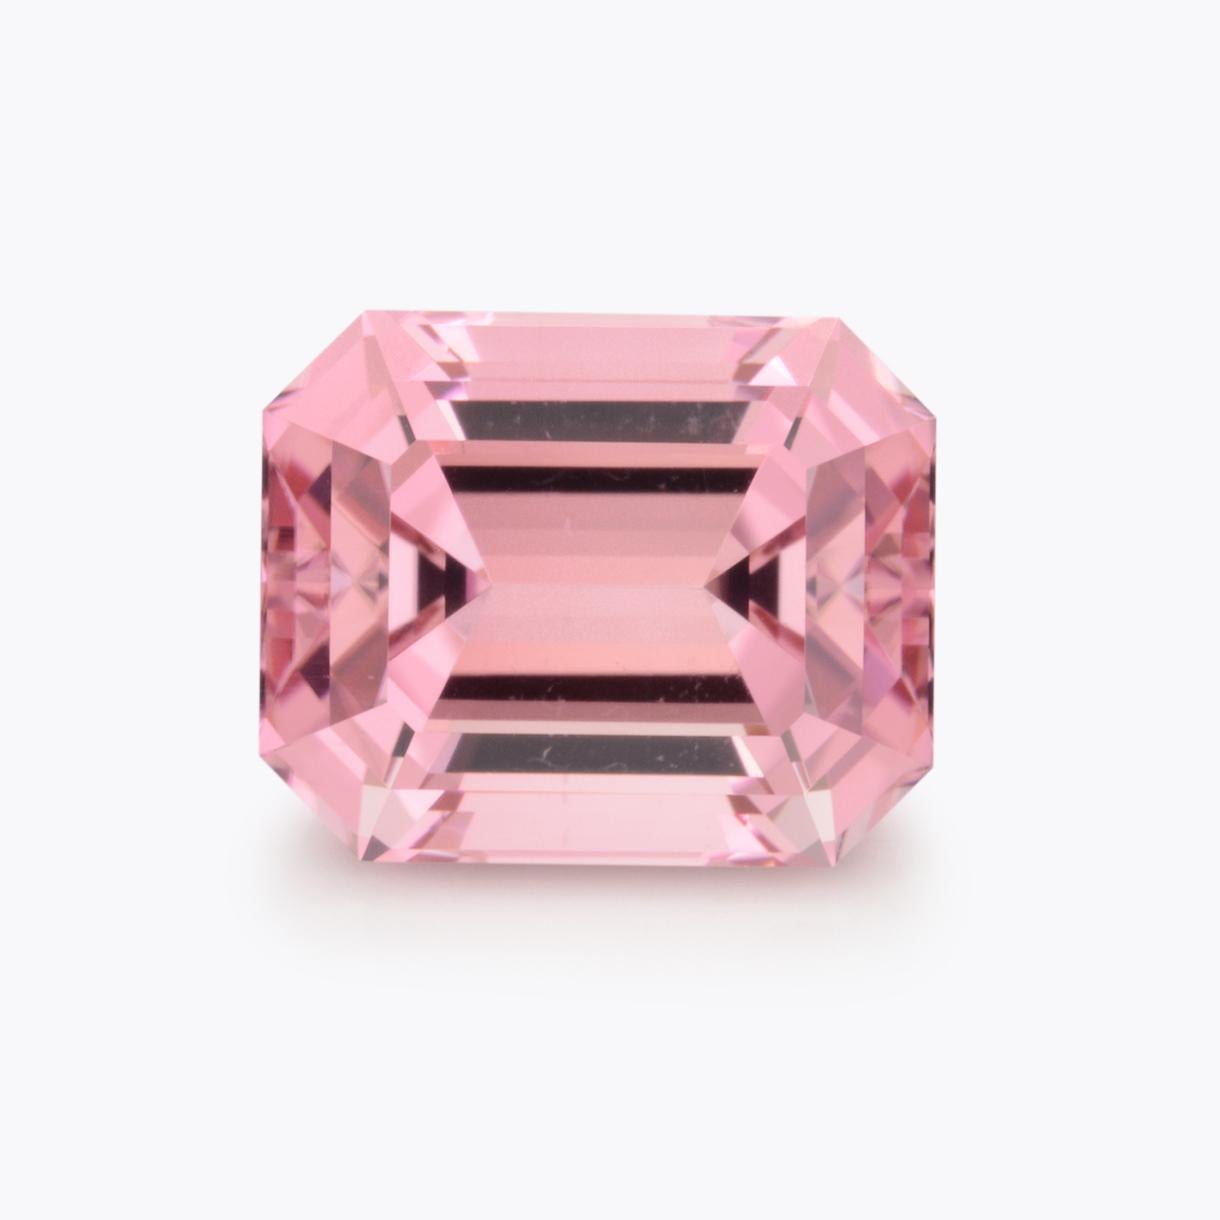 3.41 Carat Pink Tourmaline emerald-cut loose gemstone, offered unmounted to a gem lover.
Returns are accepted and paid by us within 7 days of delivery.
We offer supreme custom jewelry work upon request. Please contact us for more details.
For your